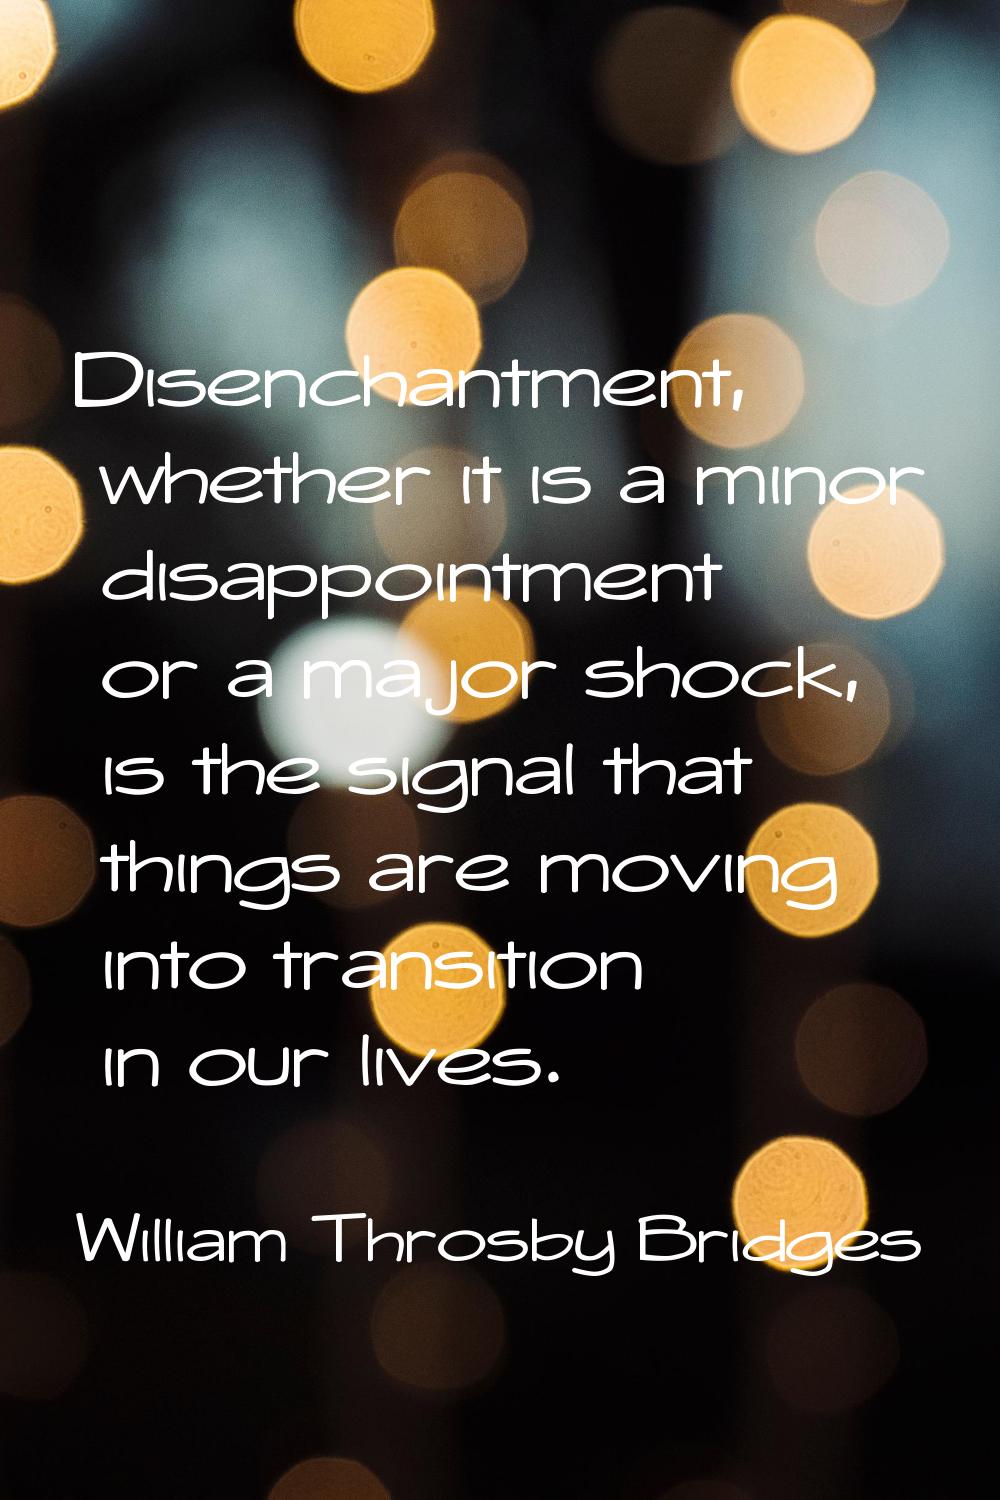 Disenchantment, whether it is a minor disappointment or a major shock, is the signal that things ar